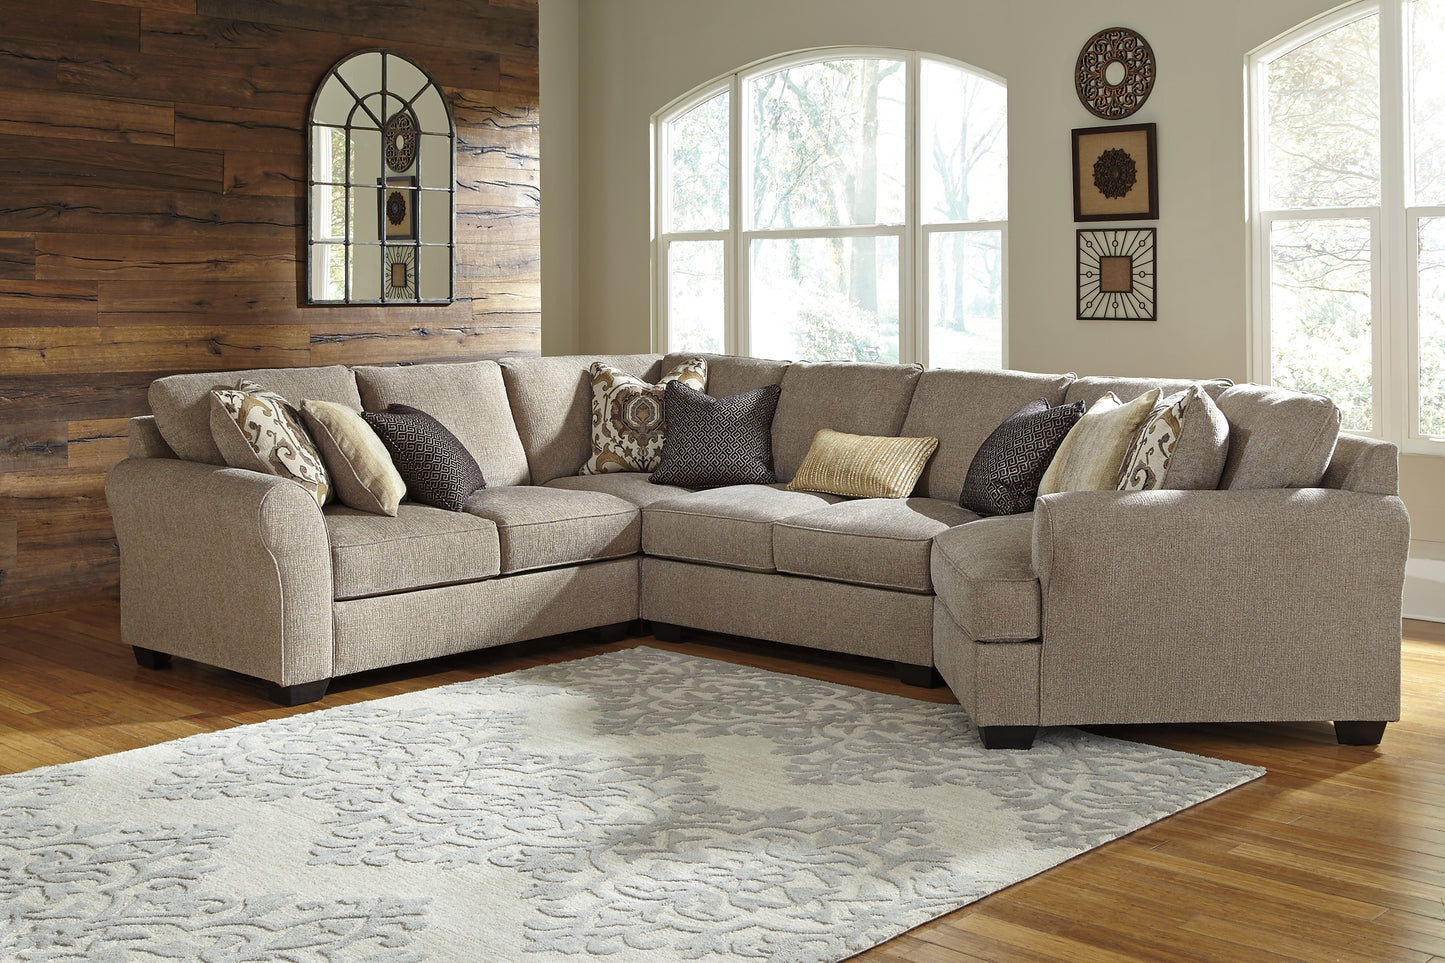 Pantomine 4-Piece Sectional with Ottoman Wilson Furniture (OH)  in Bridgeport, Ohio. Serving Bridgeport, Yorkville, Bellaire, & Avondale